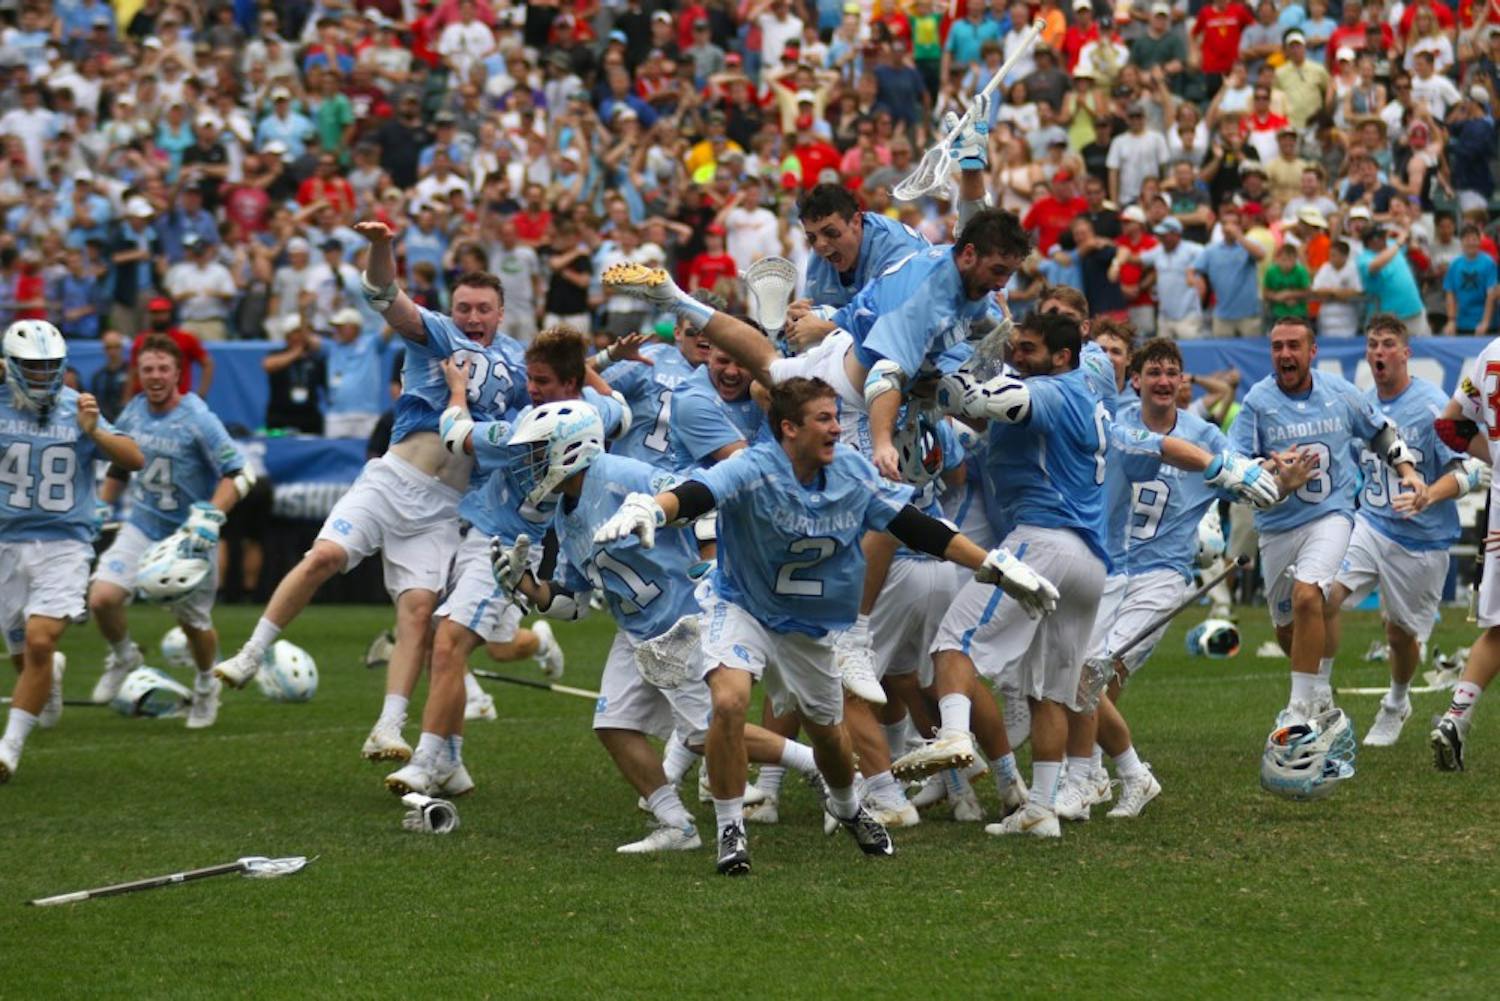 The North Carolina men's lacrosse team celebrates after defeating Maryland 14-13 in overtime to capture the program's first national championship since 1993 on Monday at Lincoln Financial Field in Philadelphia.